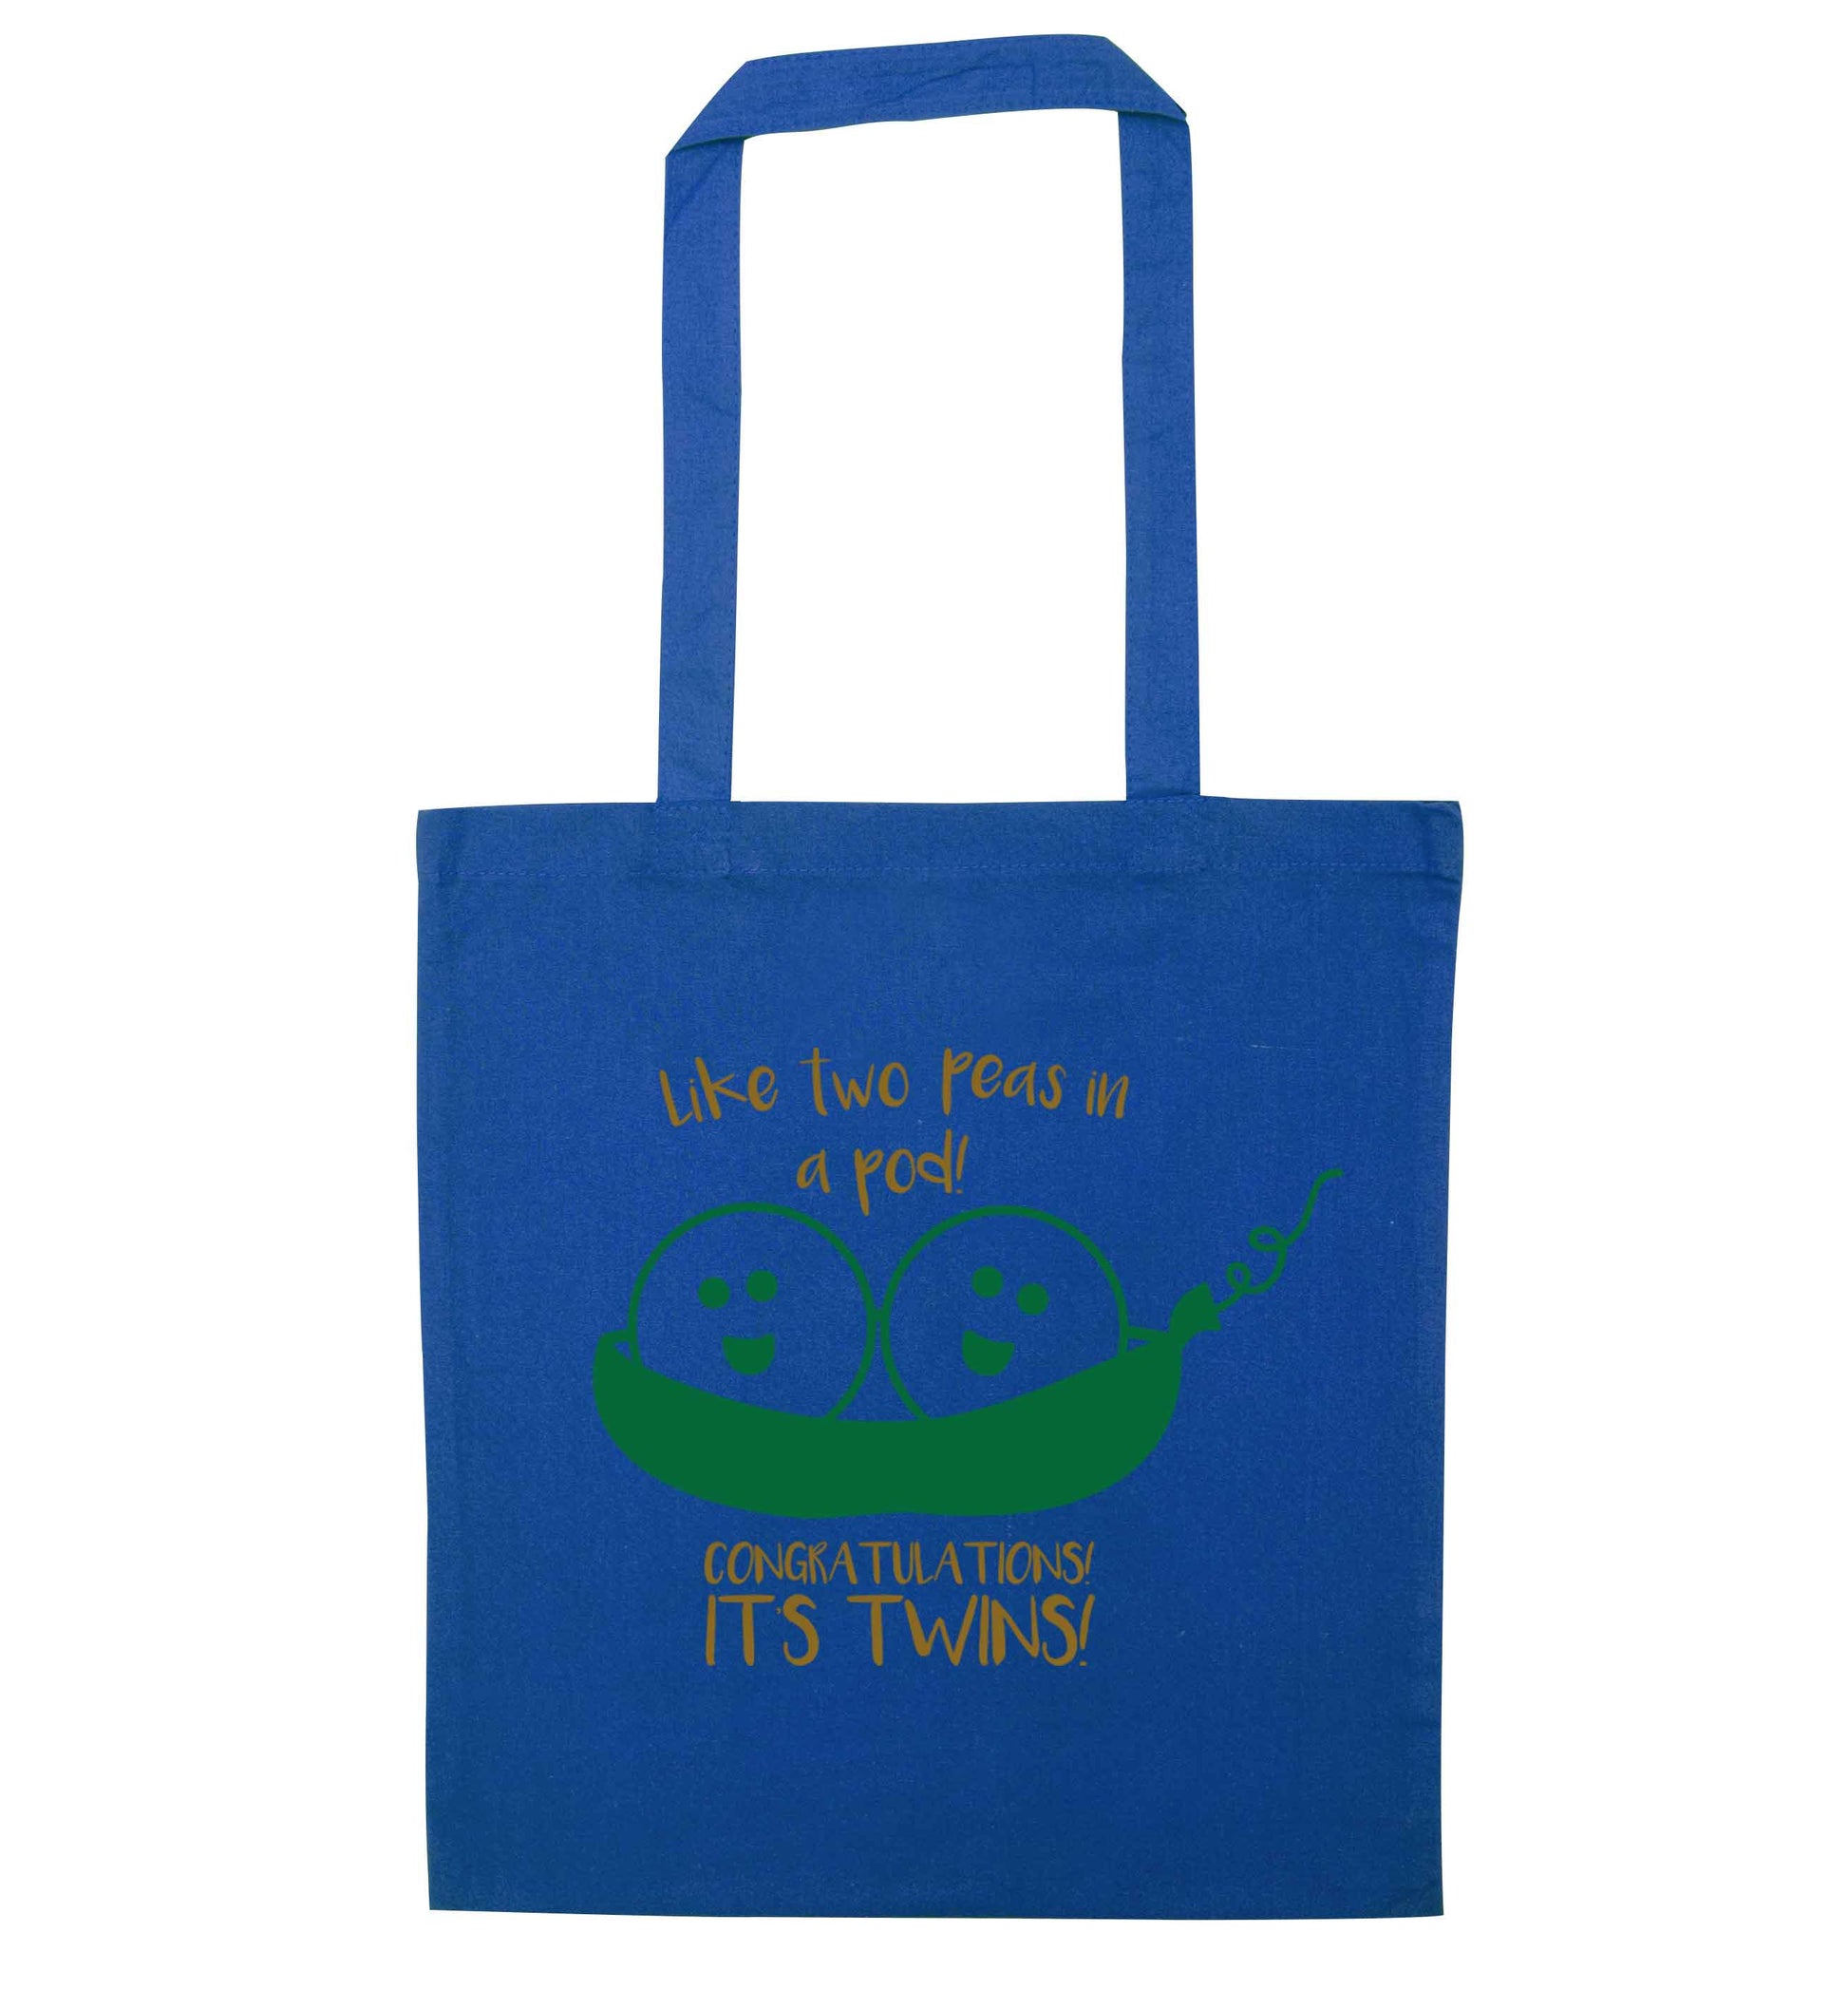 Like two peas in a pod! Congratulations it's twins! blue tote bag